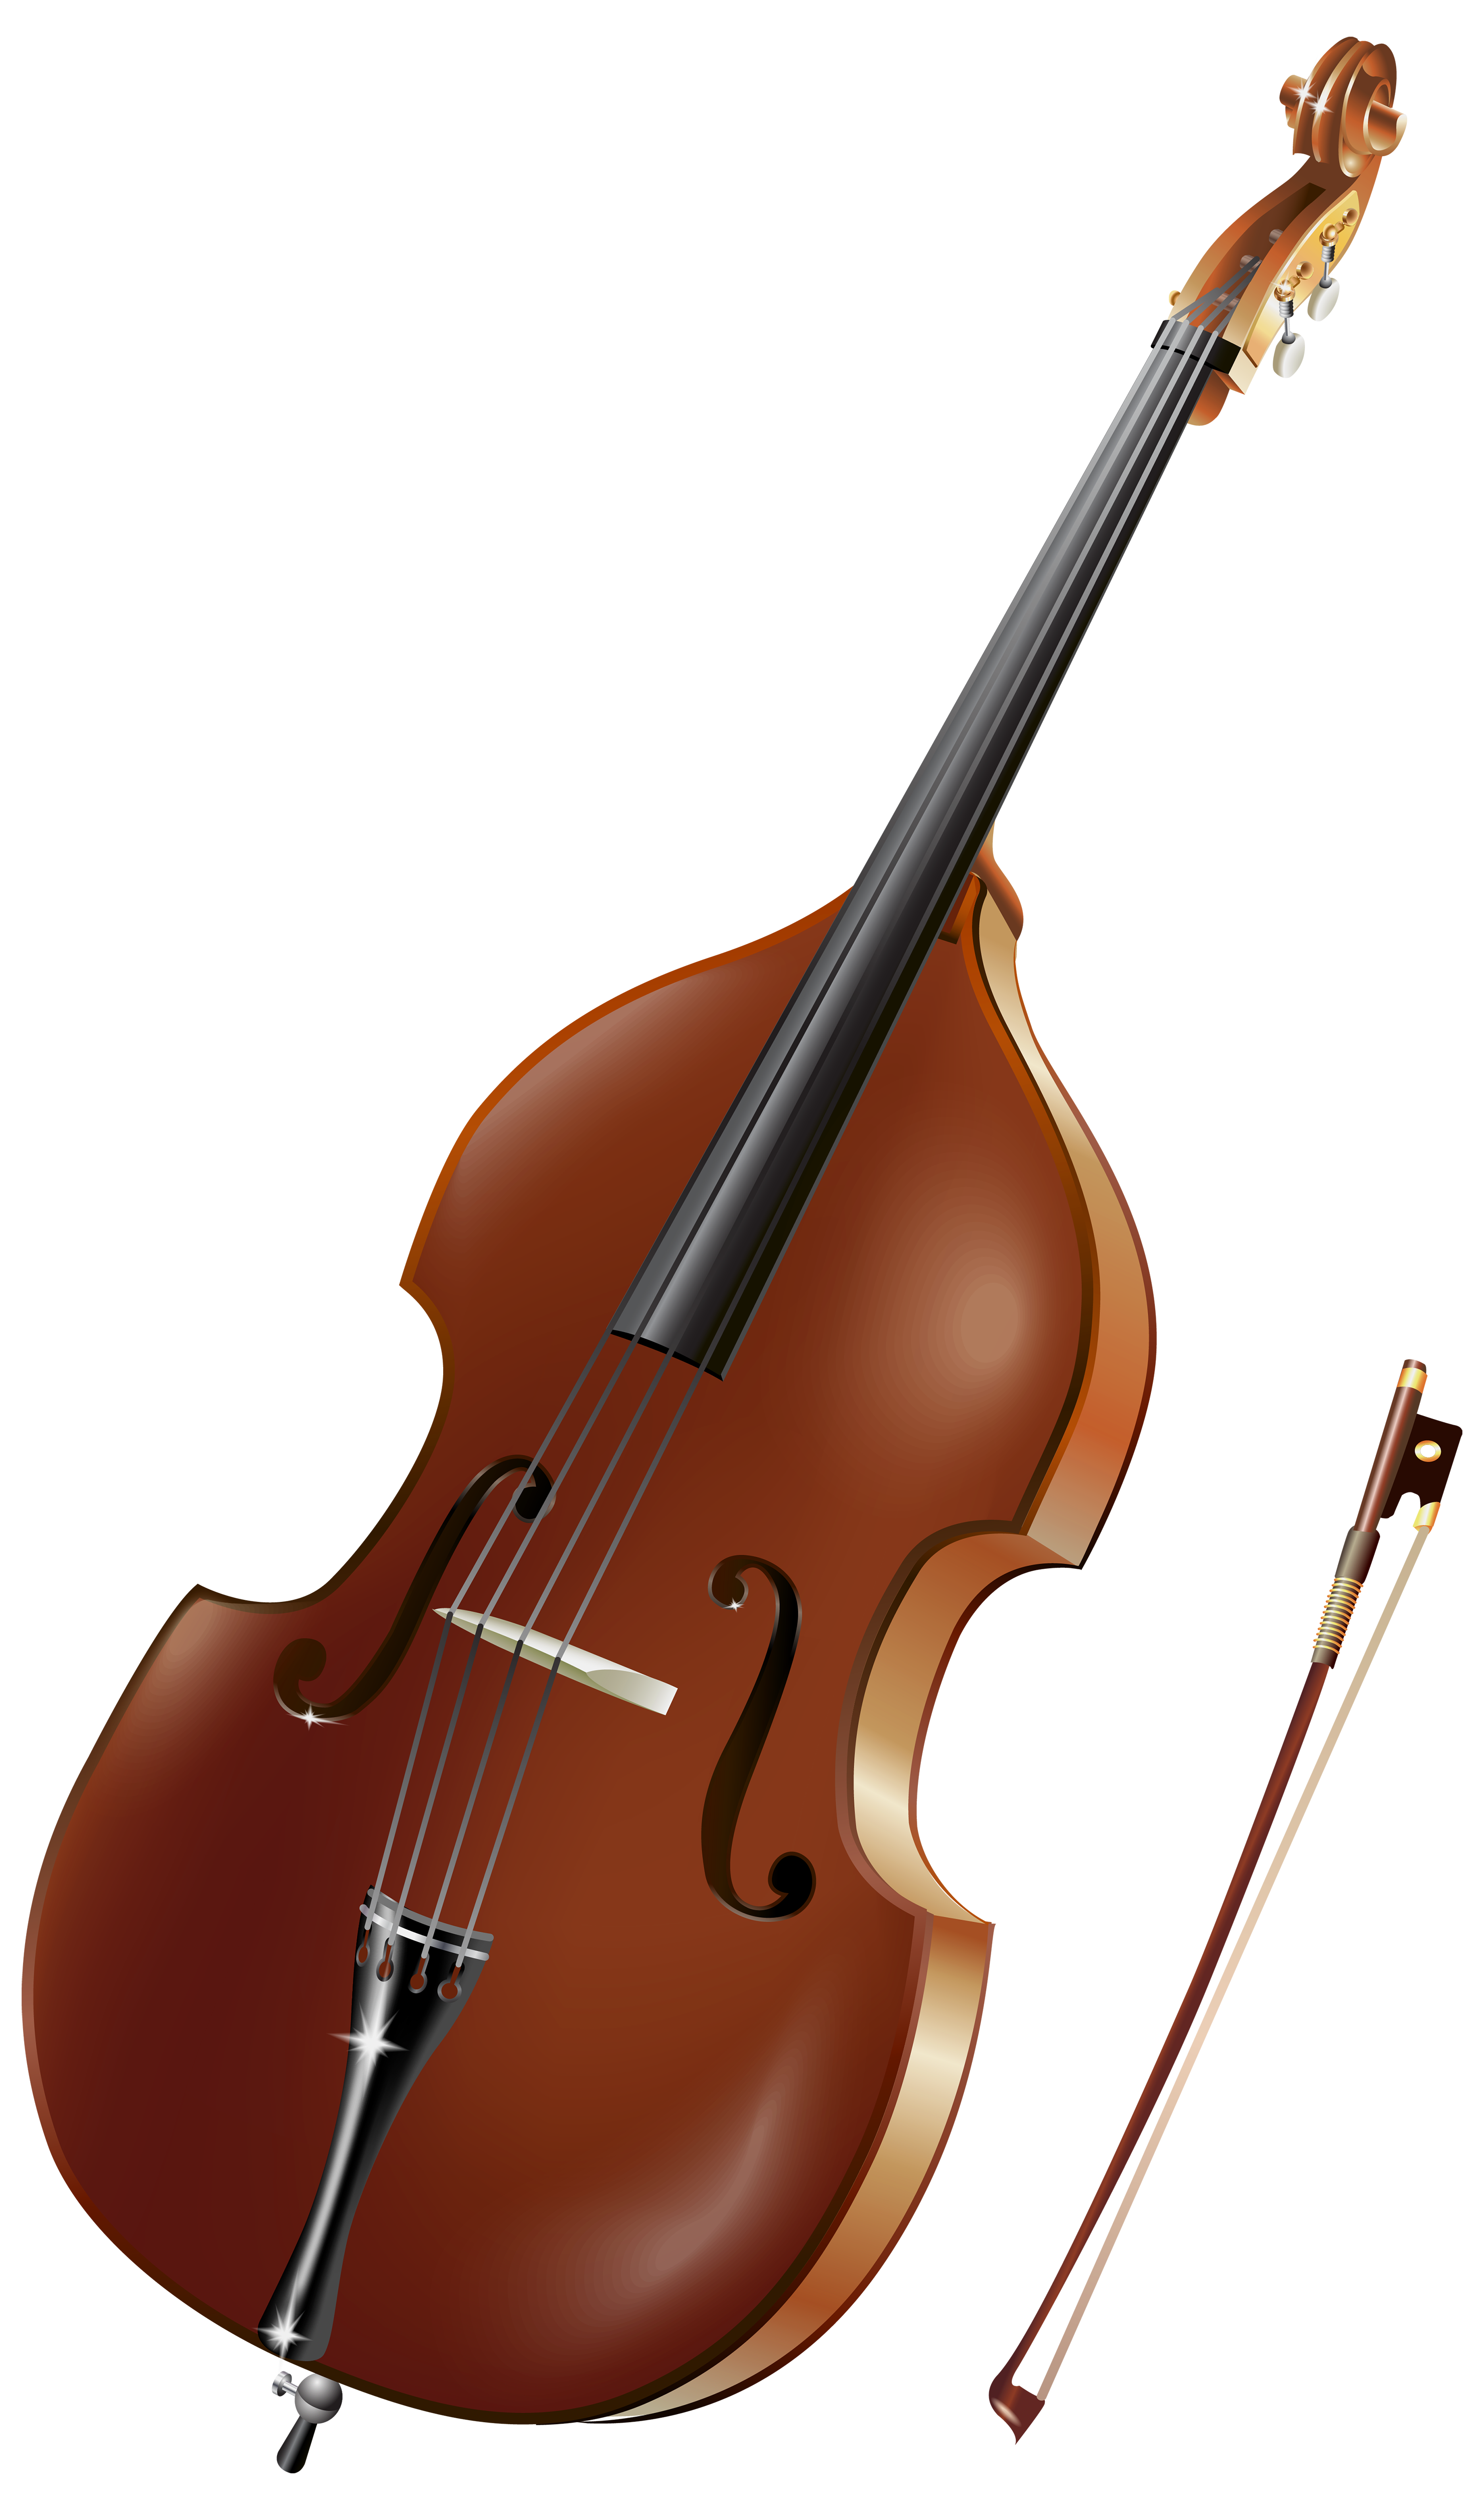 instruments clipart double bass